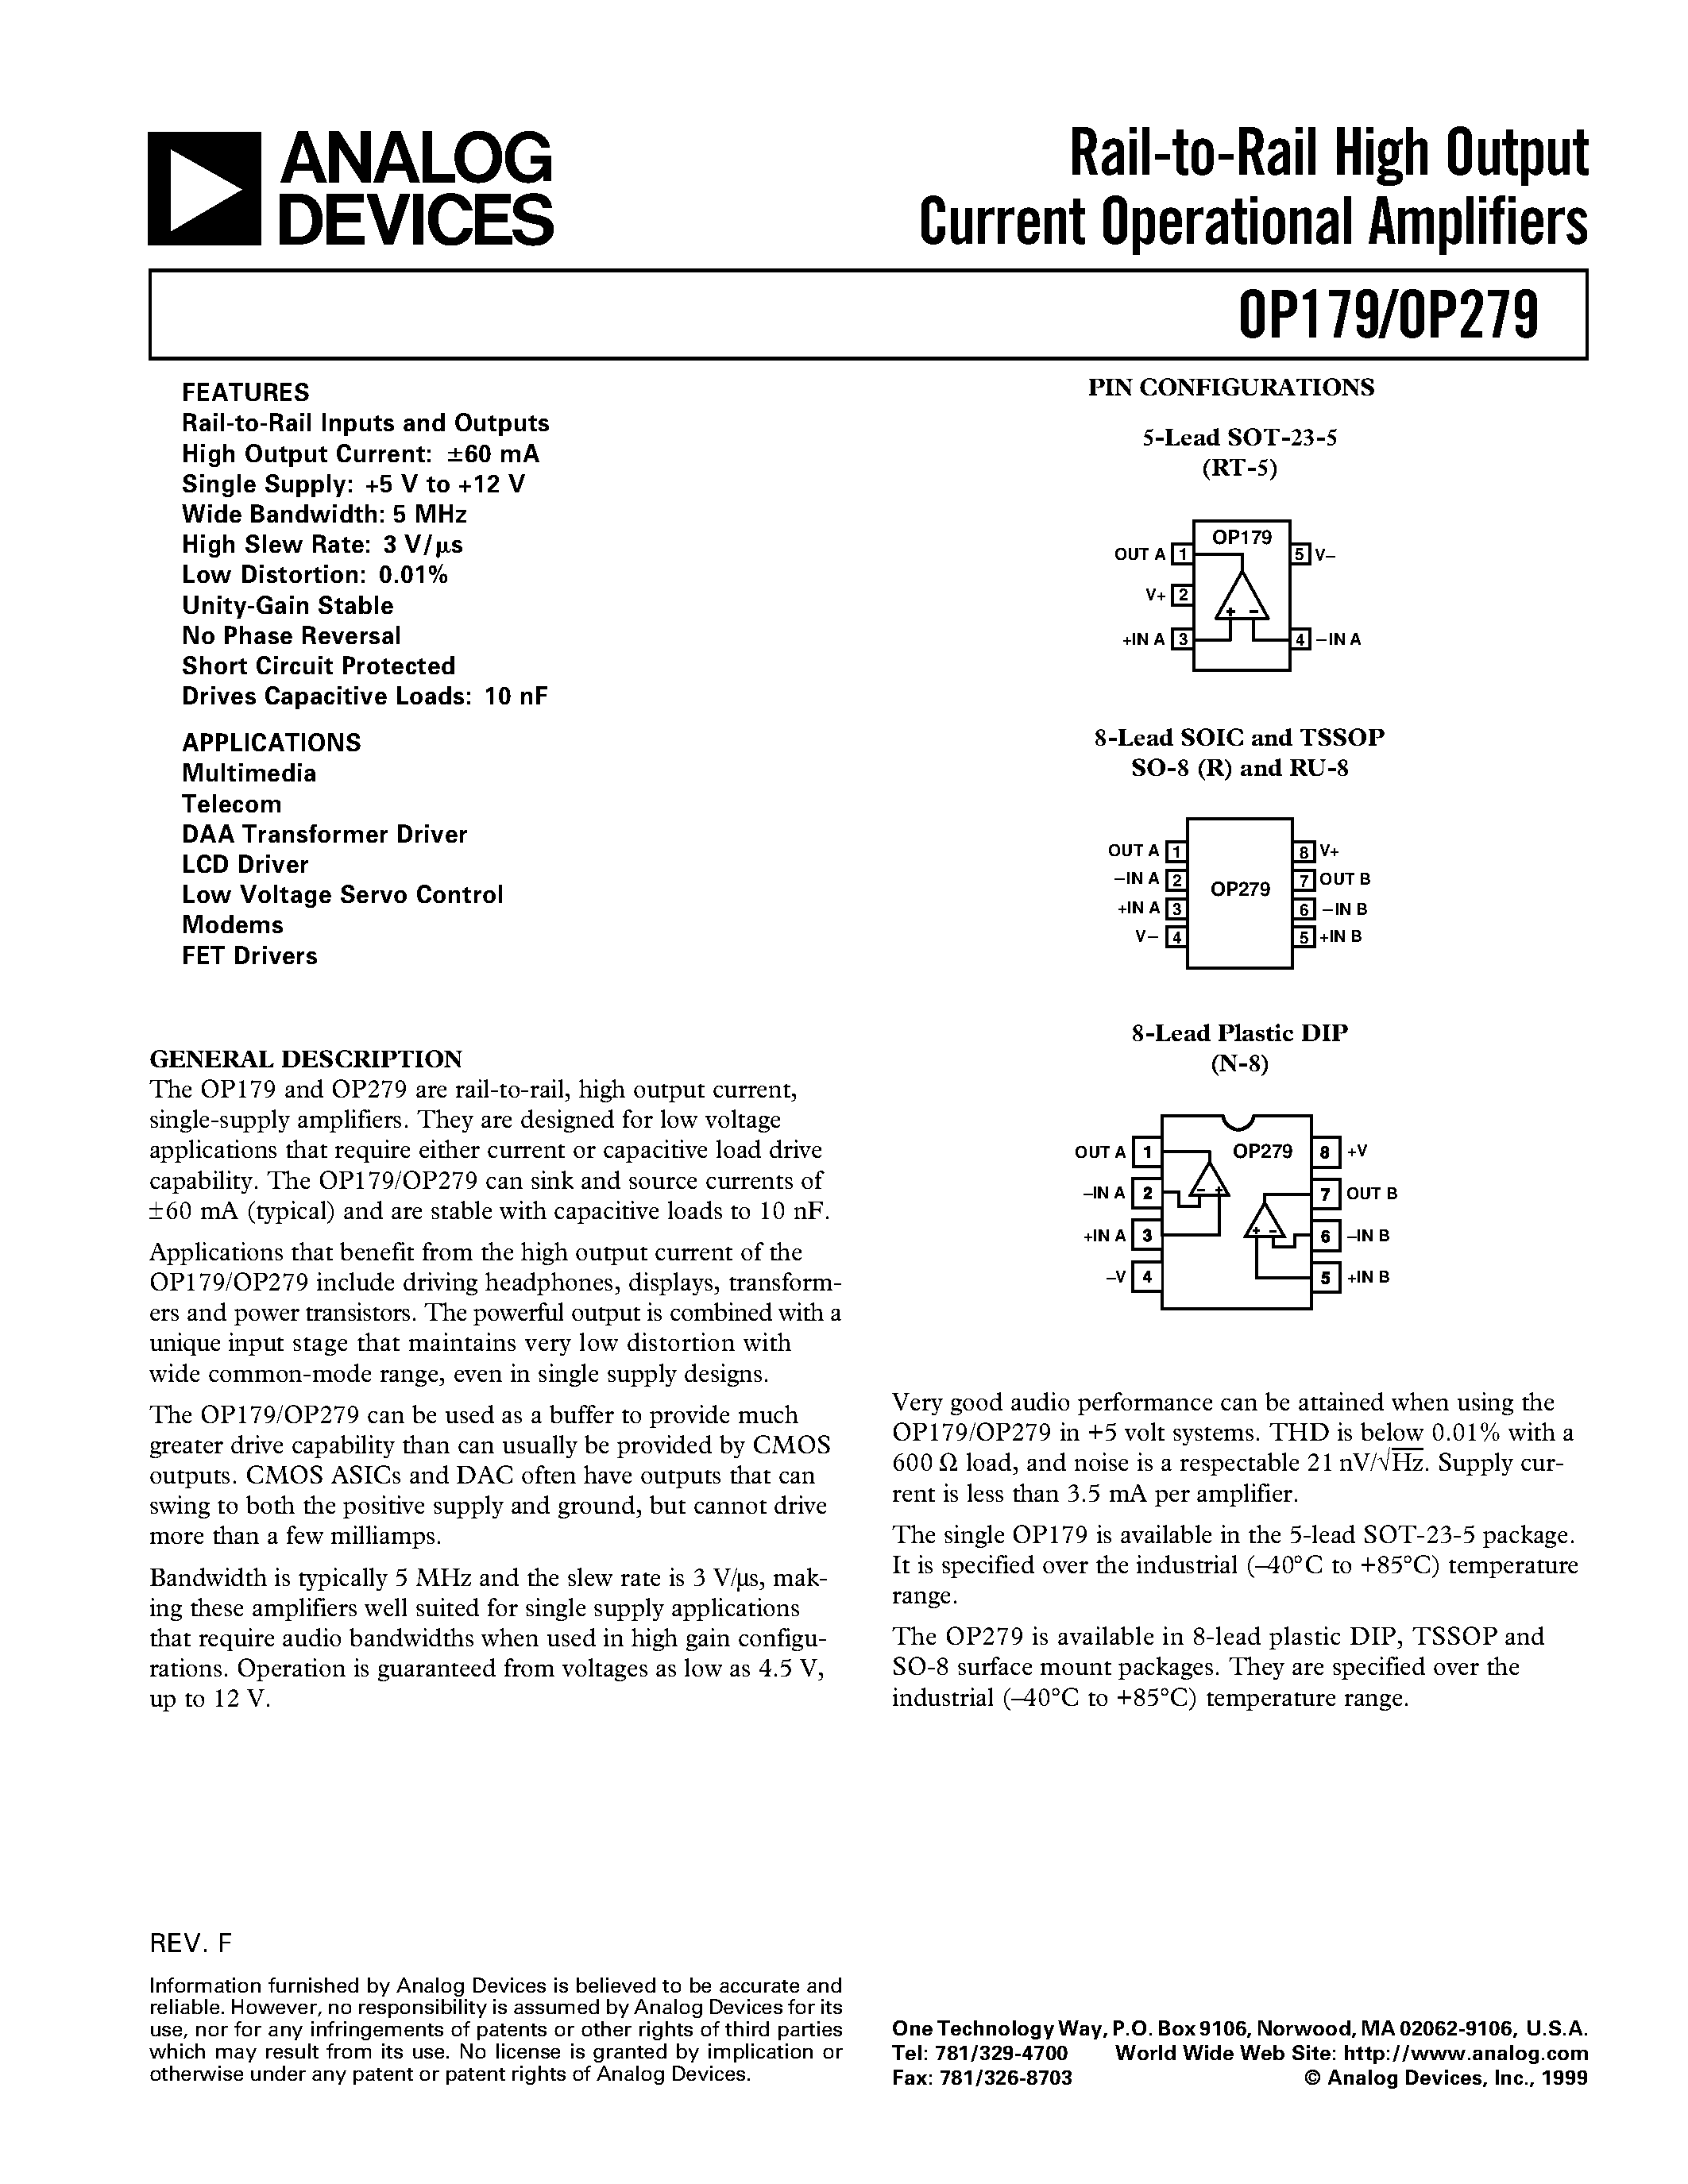 Datasheet OP179 - Rail-to-Rail High Output Current Operational Amplifiers page 1